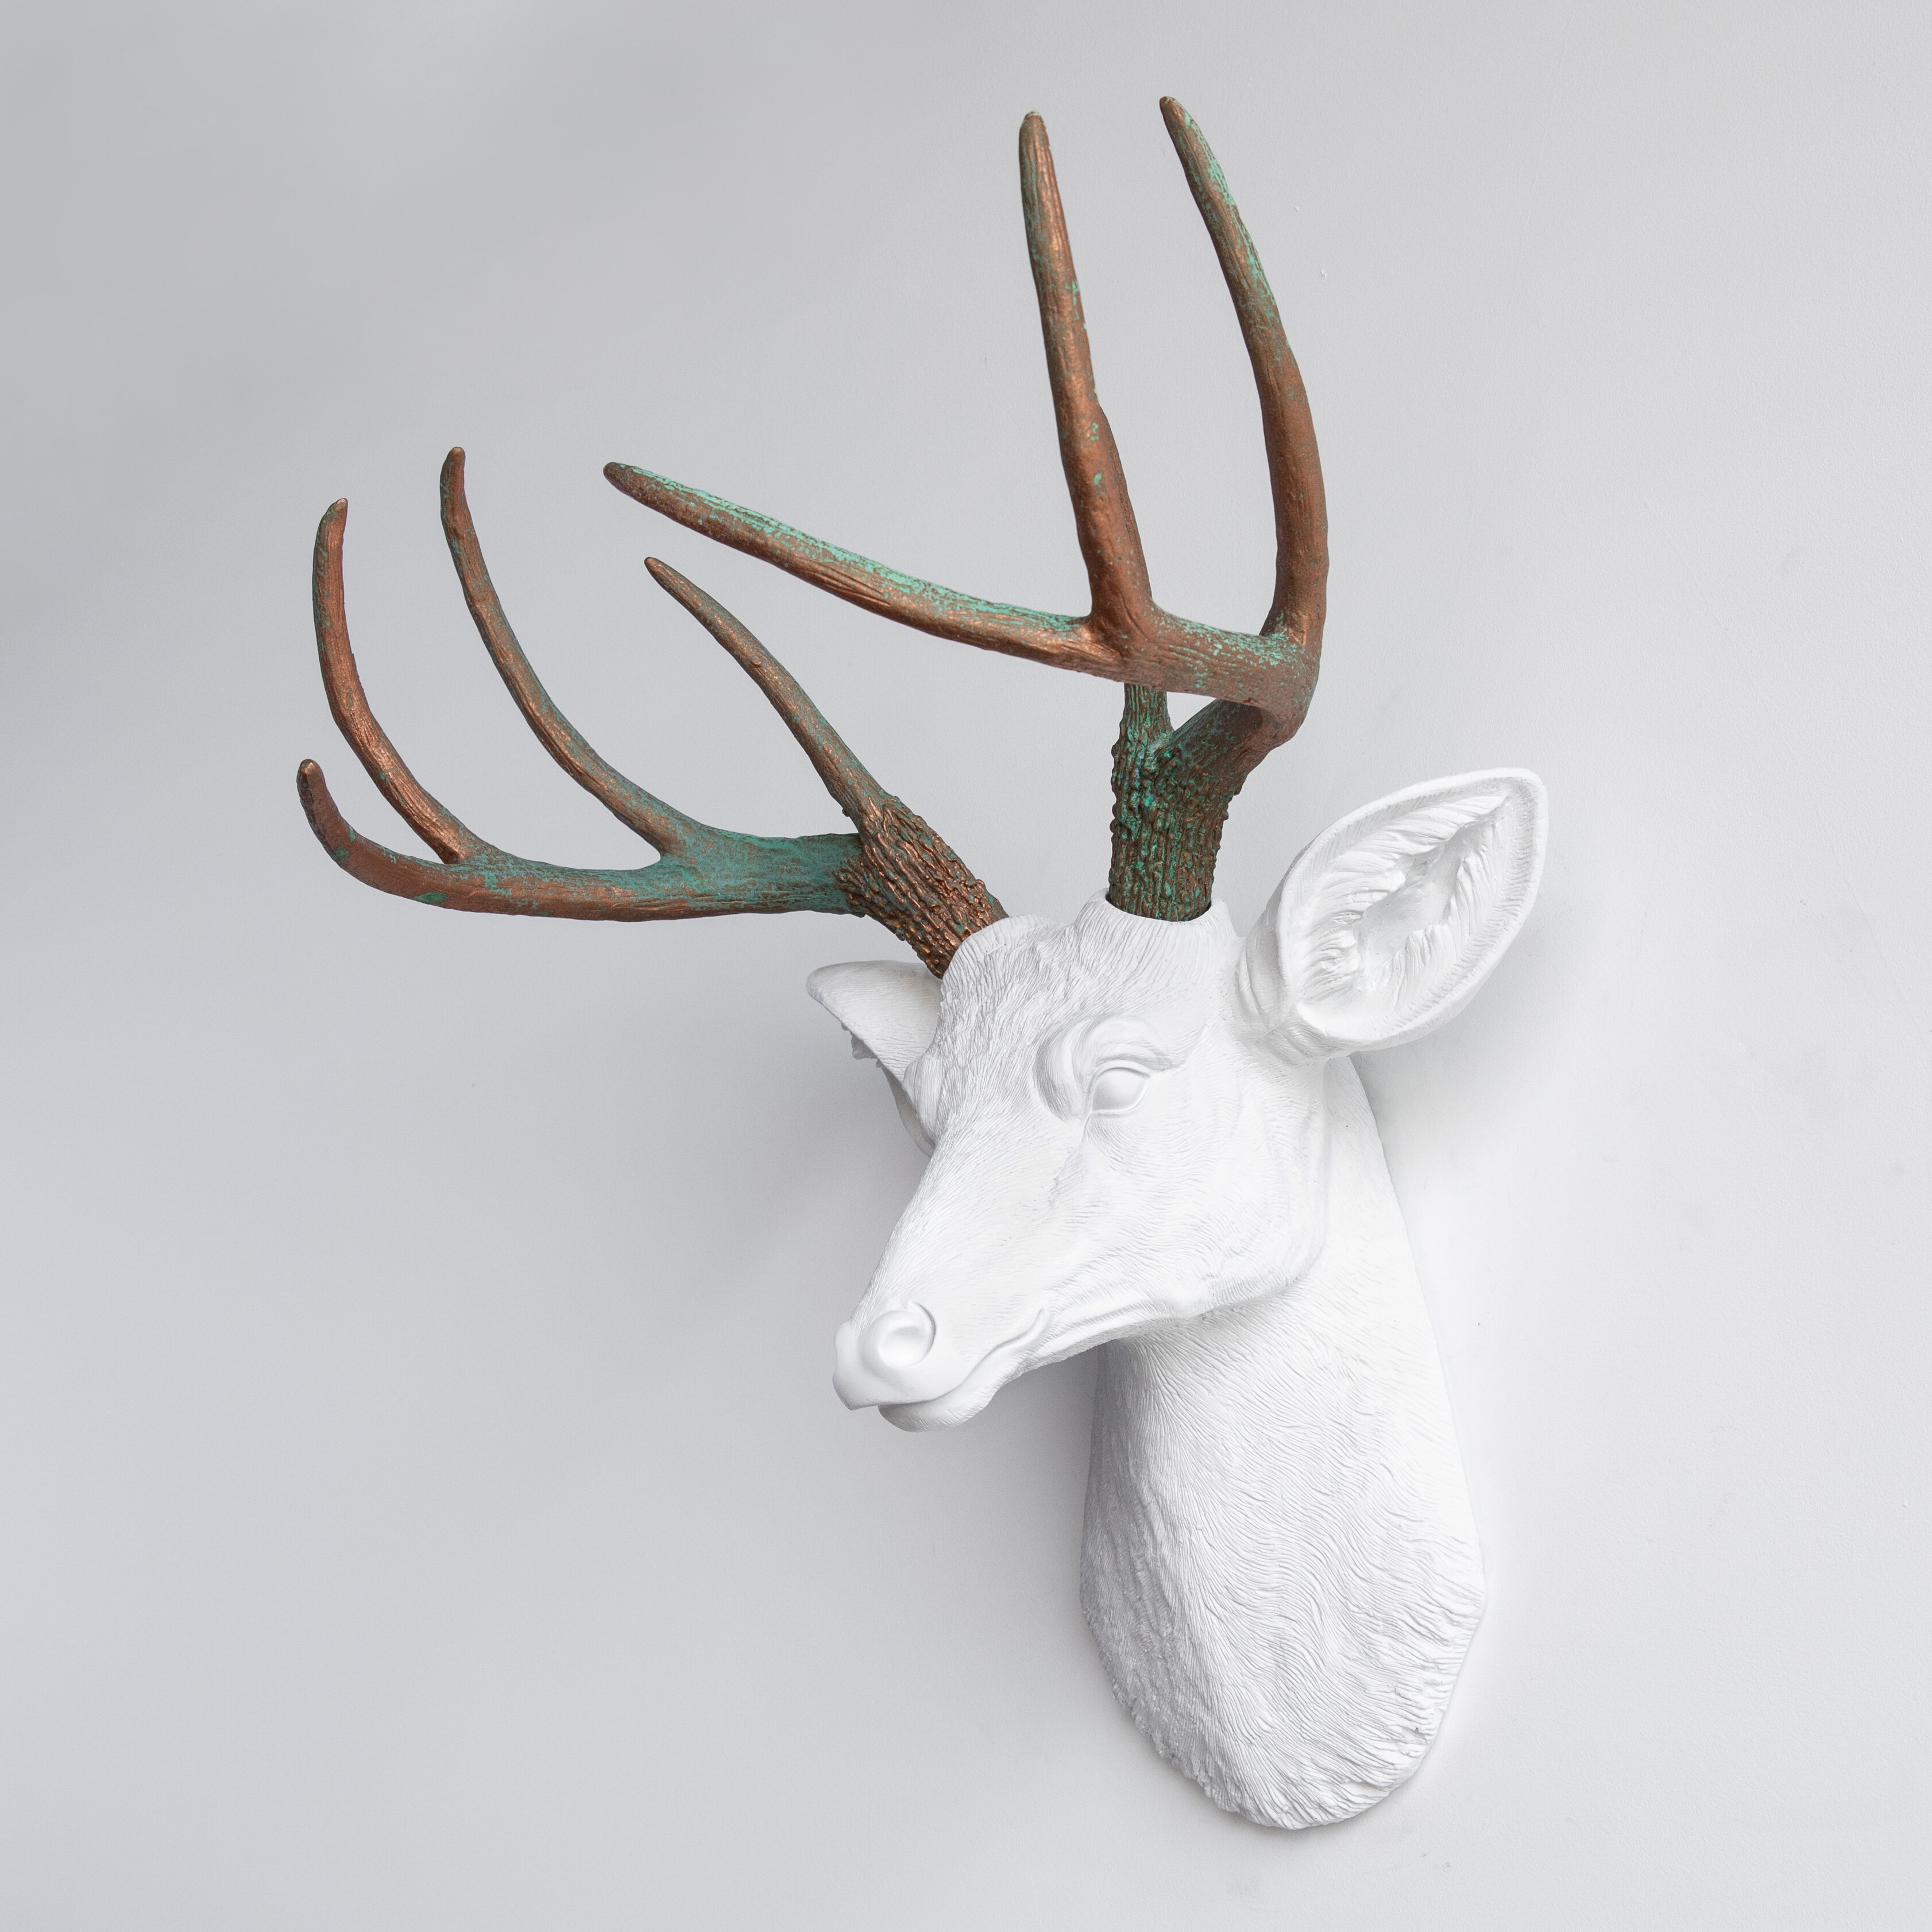 Wall-Mounted Deer Head Sculpture Wall Living Room Background Wall Porch Three-Dimensional Decoration White Deer Head Wall Decoration